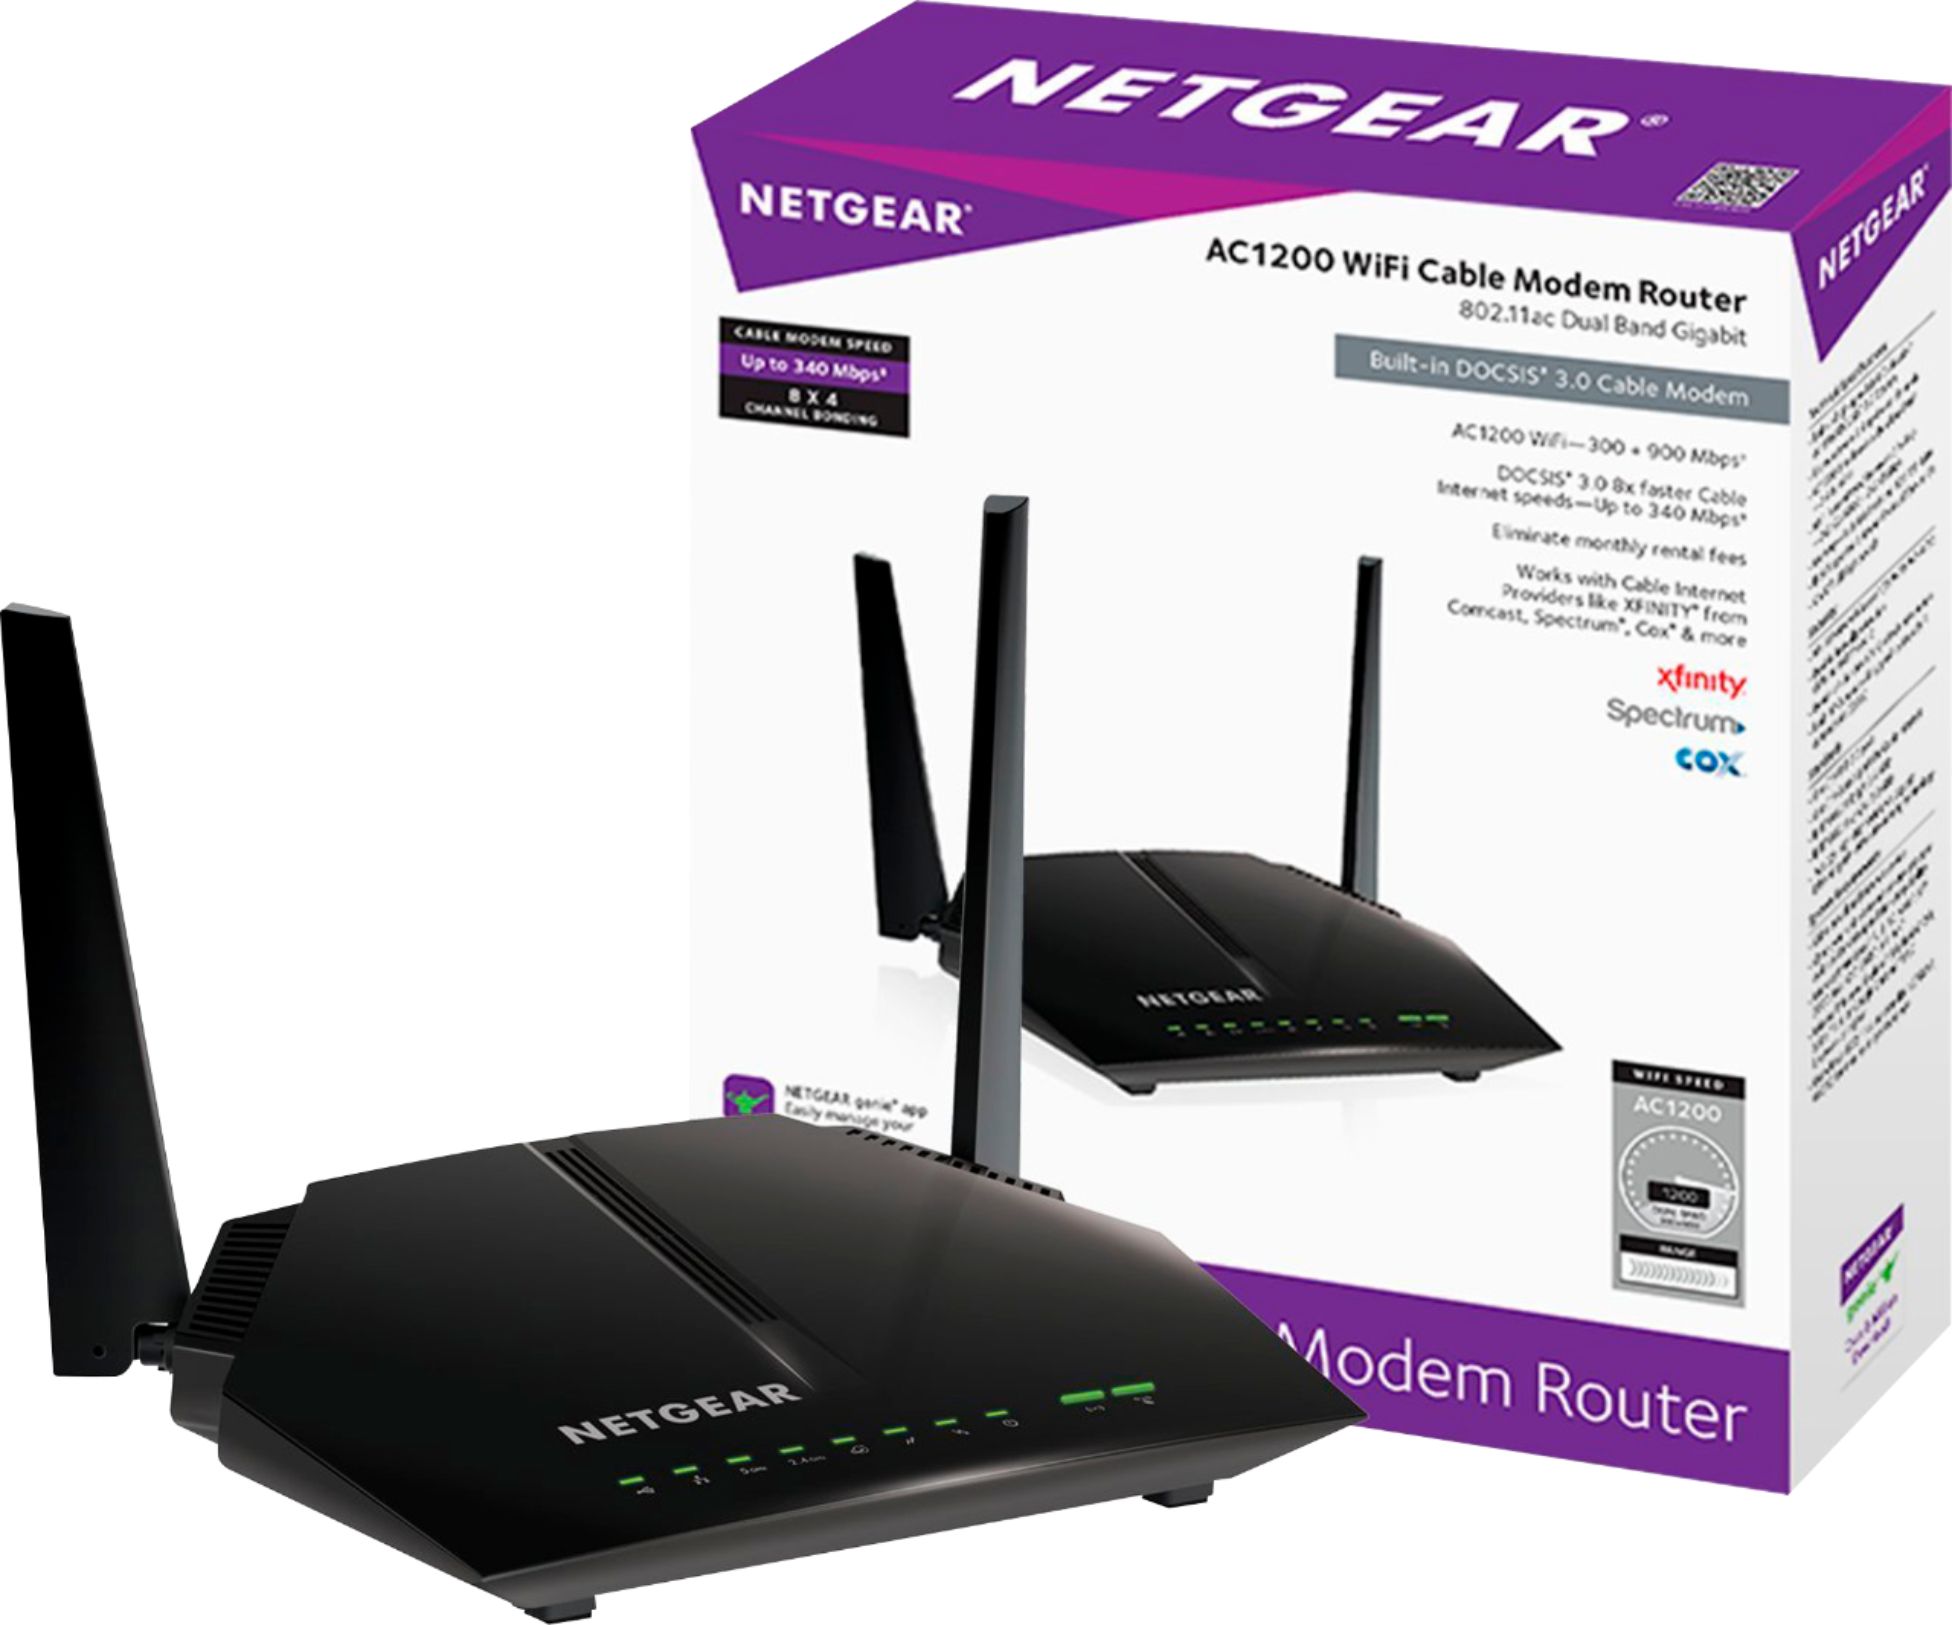 Netgear Dual Band Ac10 Router With 8 X 4 Docsis 3 0 Cable Modem Black C62 100nas Best Buy